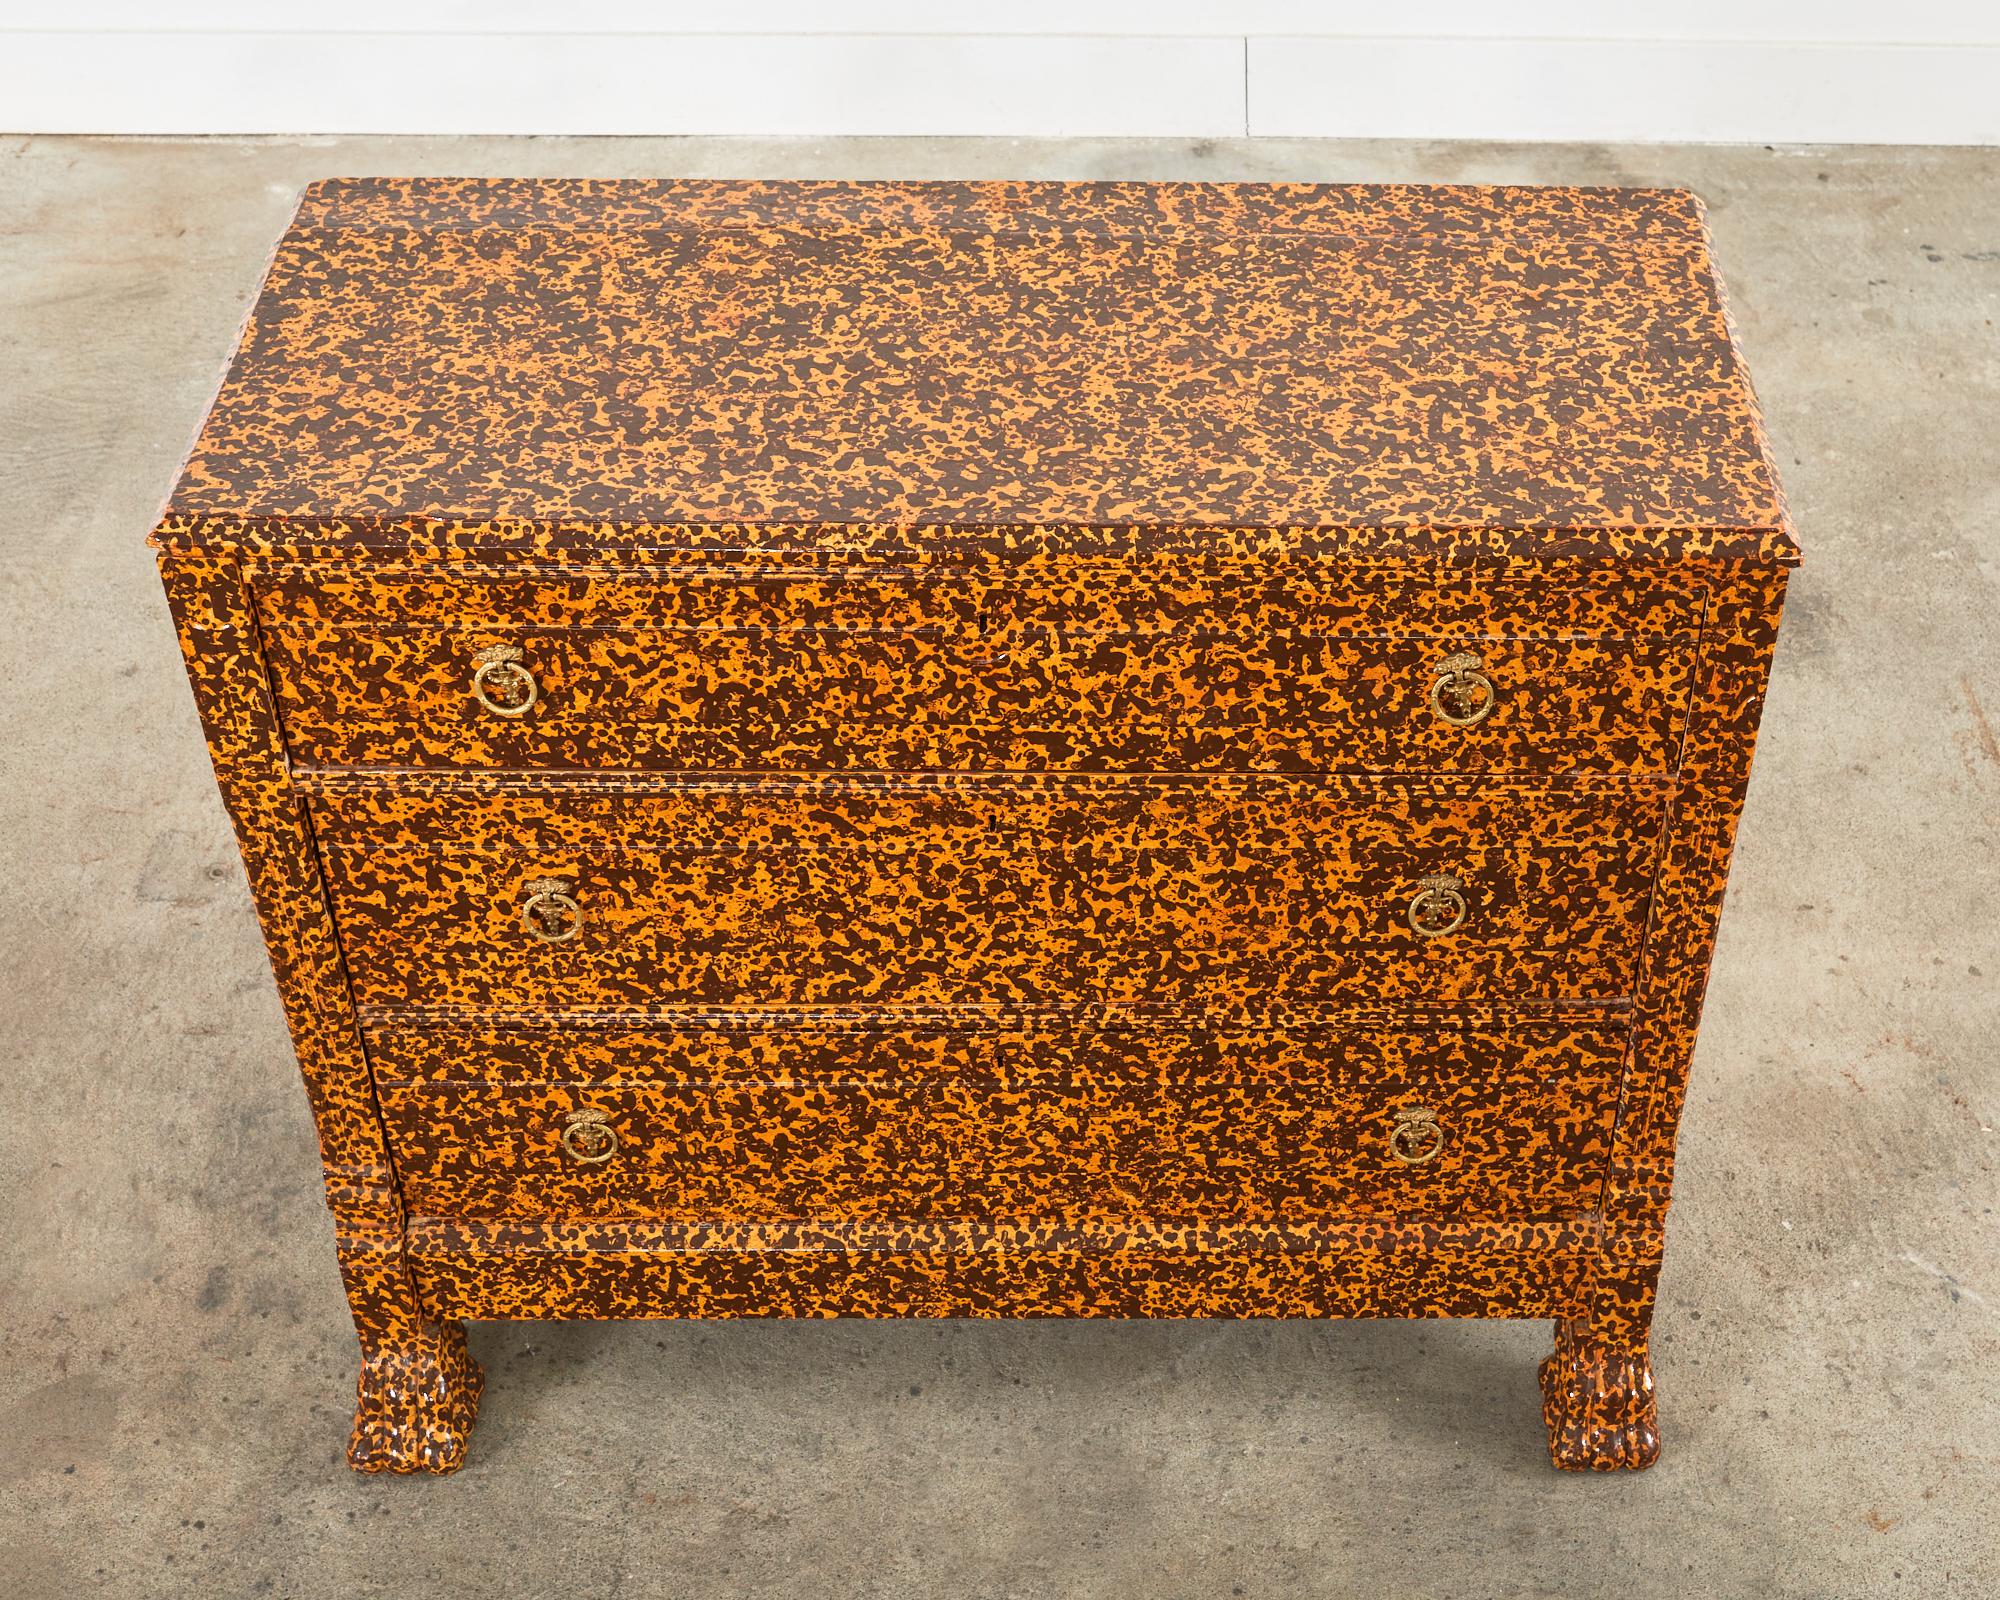 Lacquered 19th Century Empire Style Commode Spreckled by Ira Yeager